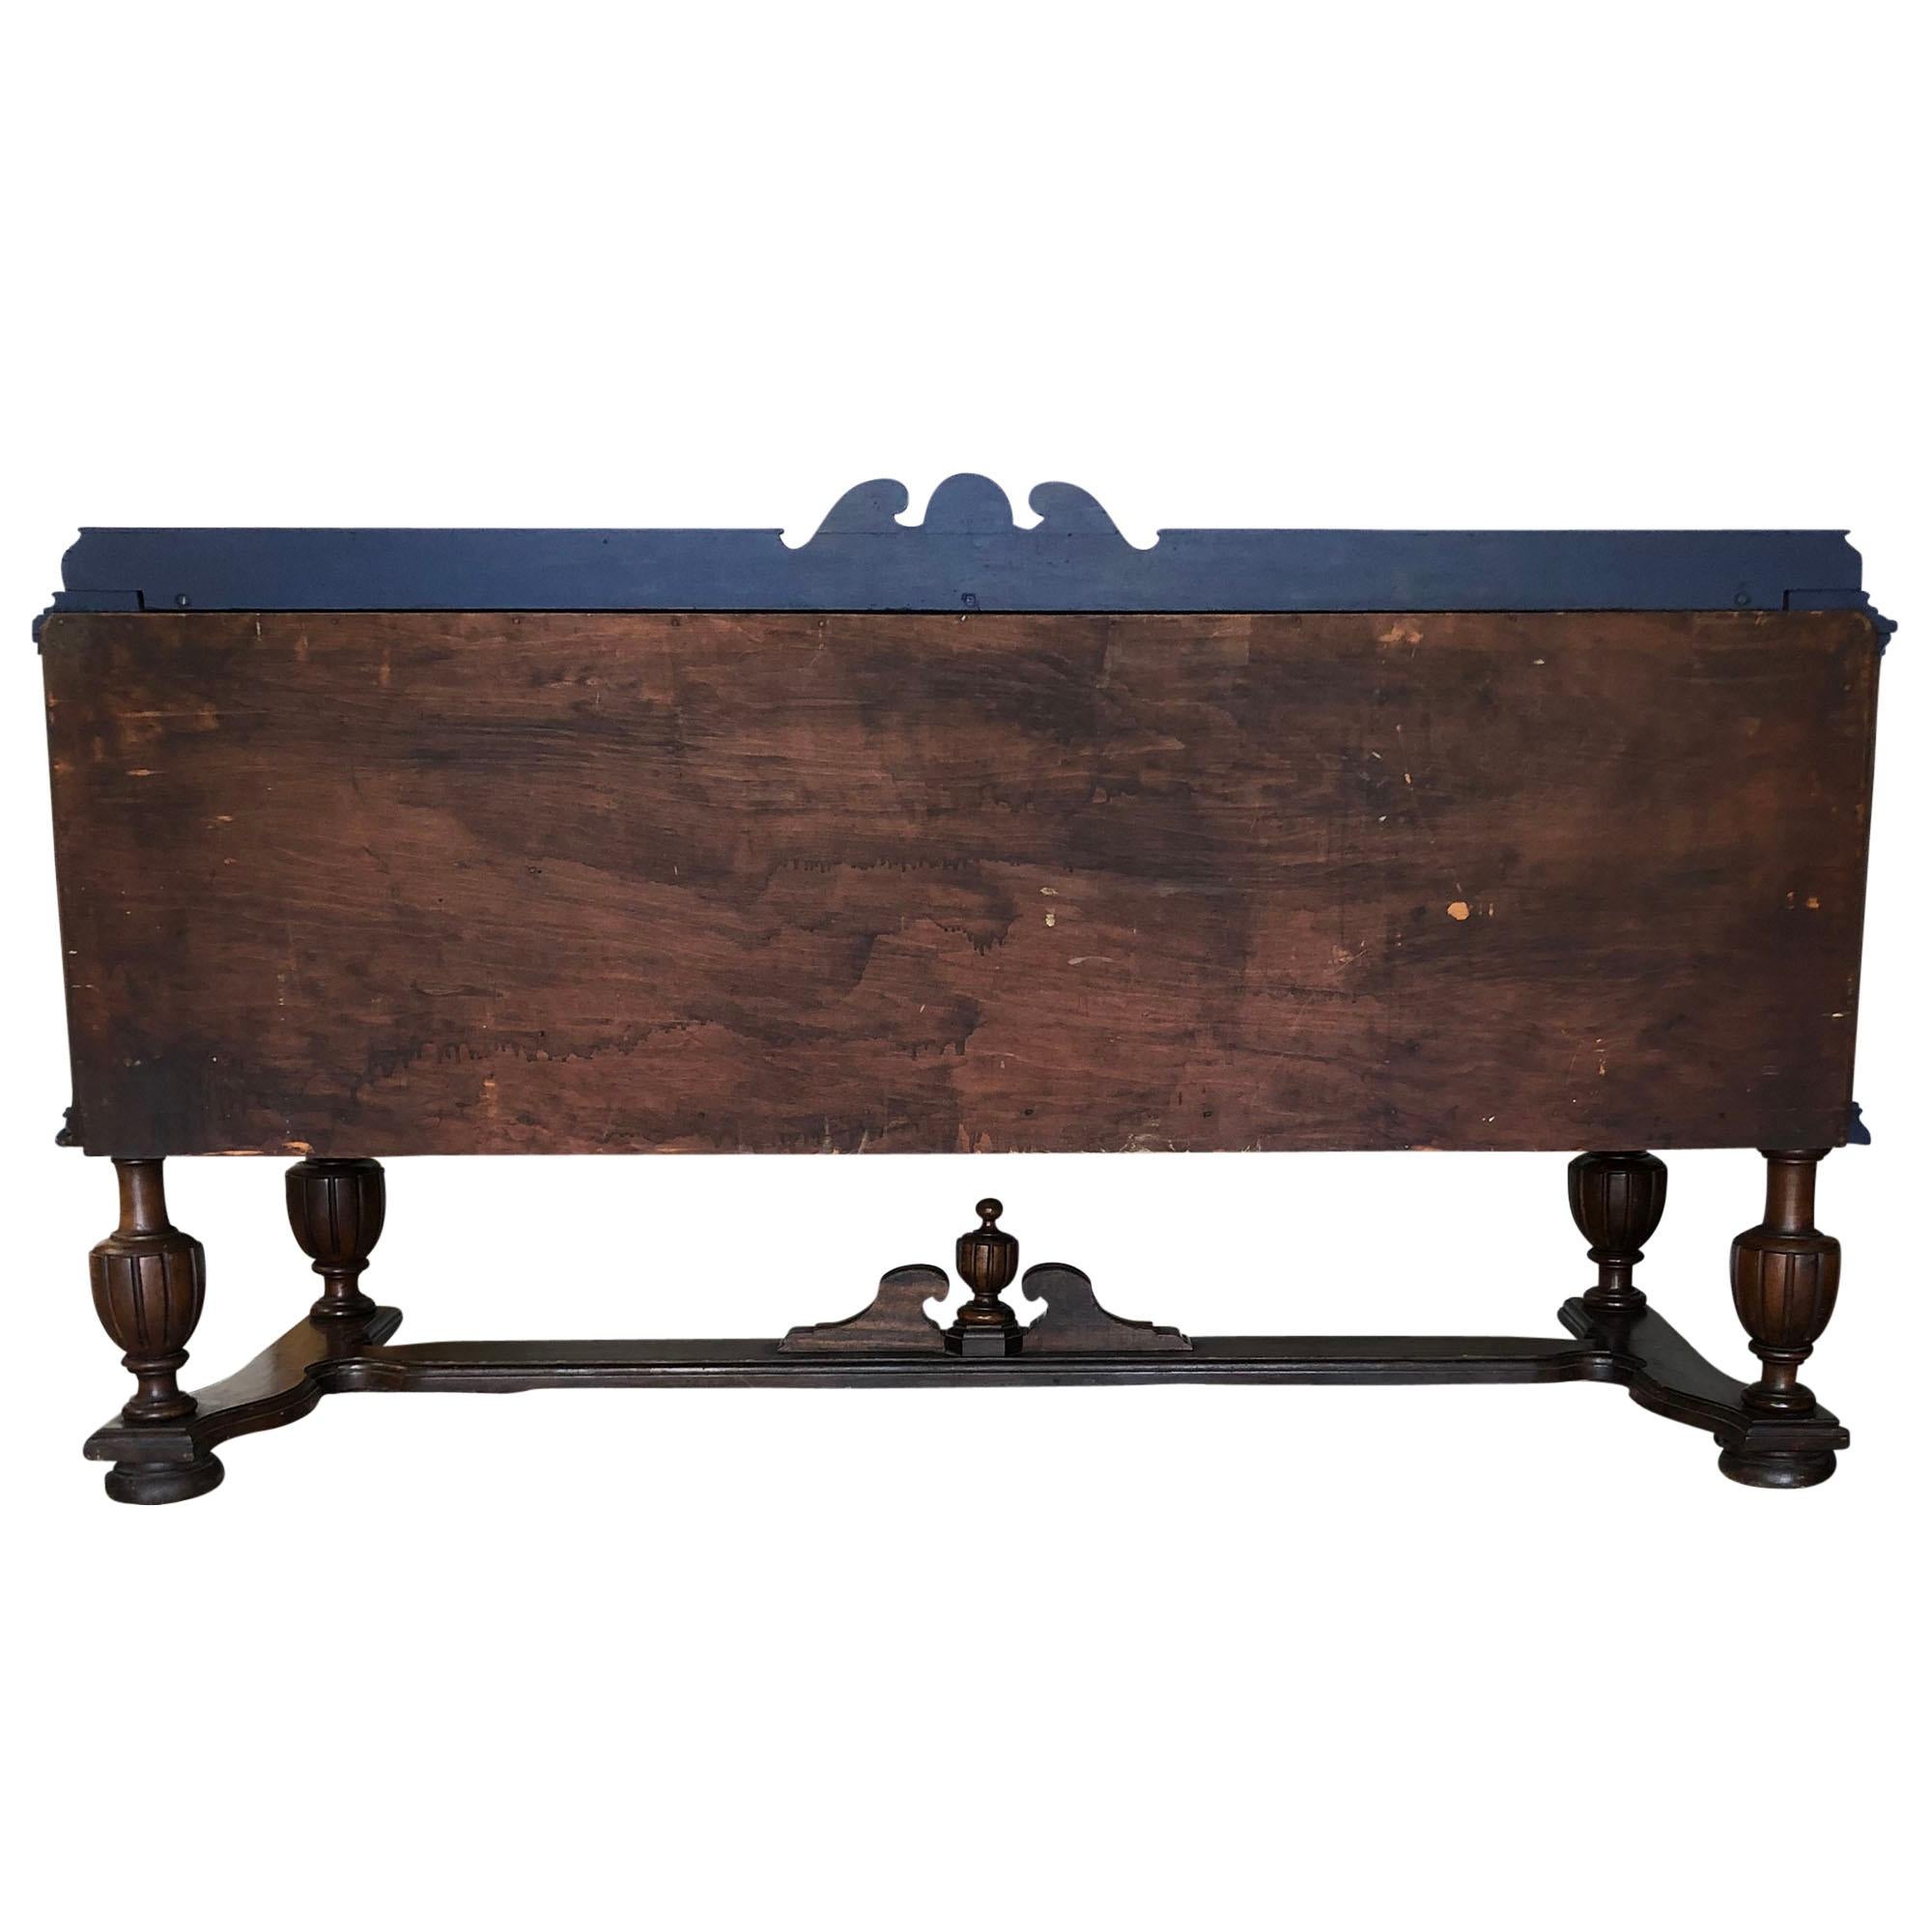 A beautiful American walnut sideboard featuring decorative veneer-work with ornate metal hardware to drawers and cabinets. It rests on carved wooden legs and is unmarked. The sideboard has been updated with navy blue accents and highlighted with a